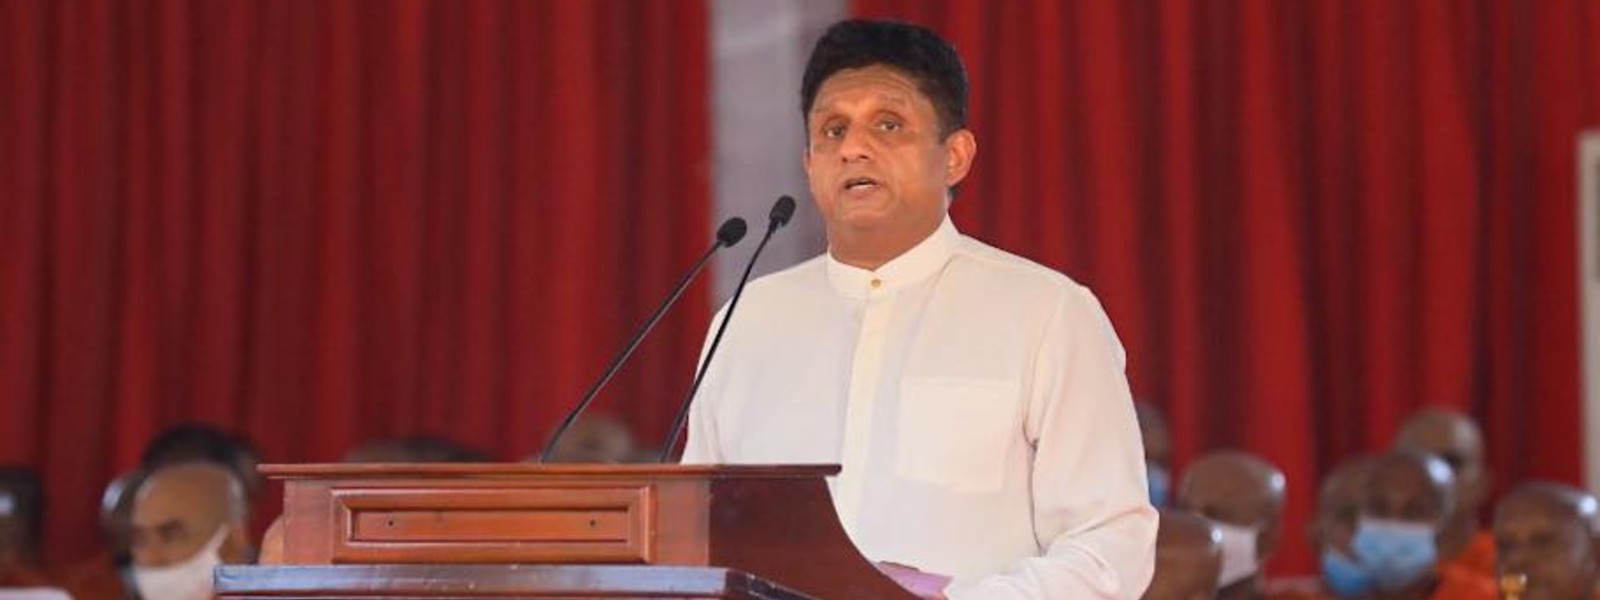 STOP BURDENING THE PEOPLE &  REVERSE THE FUEL PRICE HIKE IMMEDIATELY- SAJITH